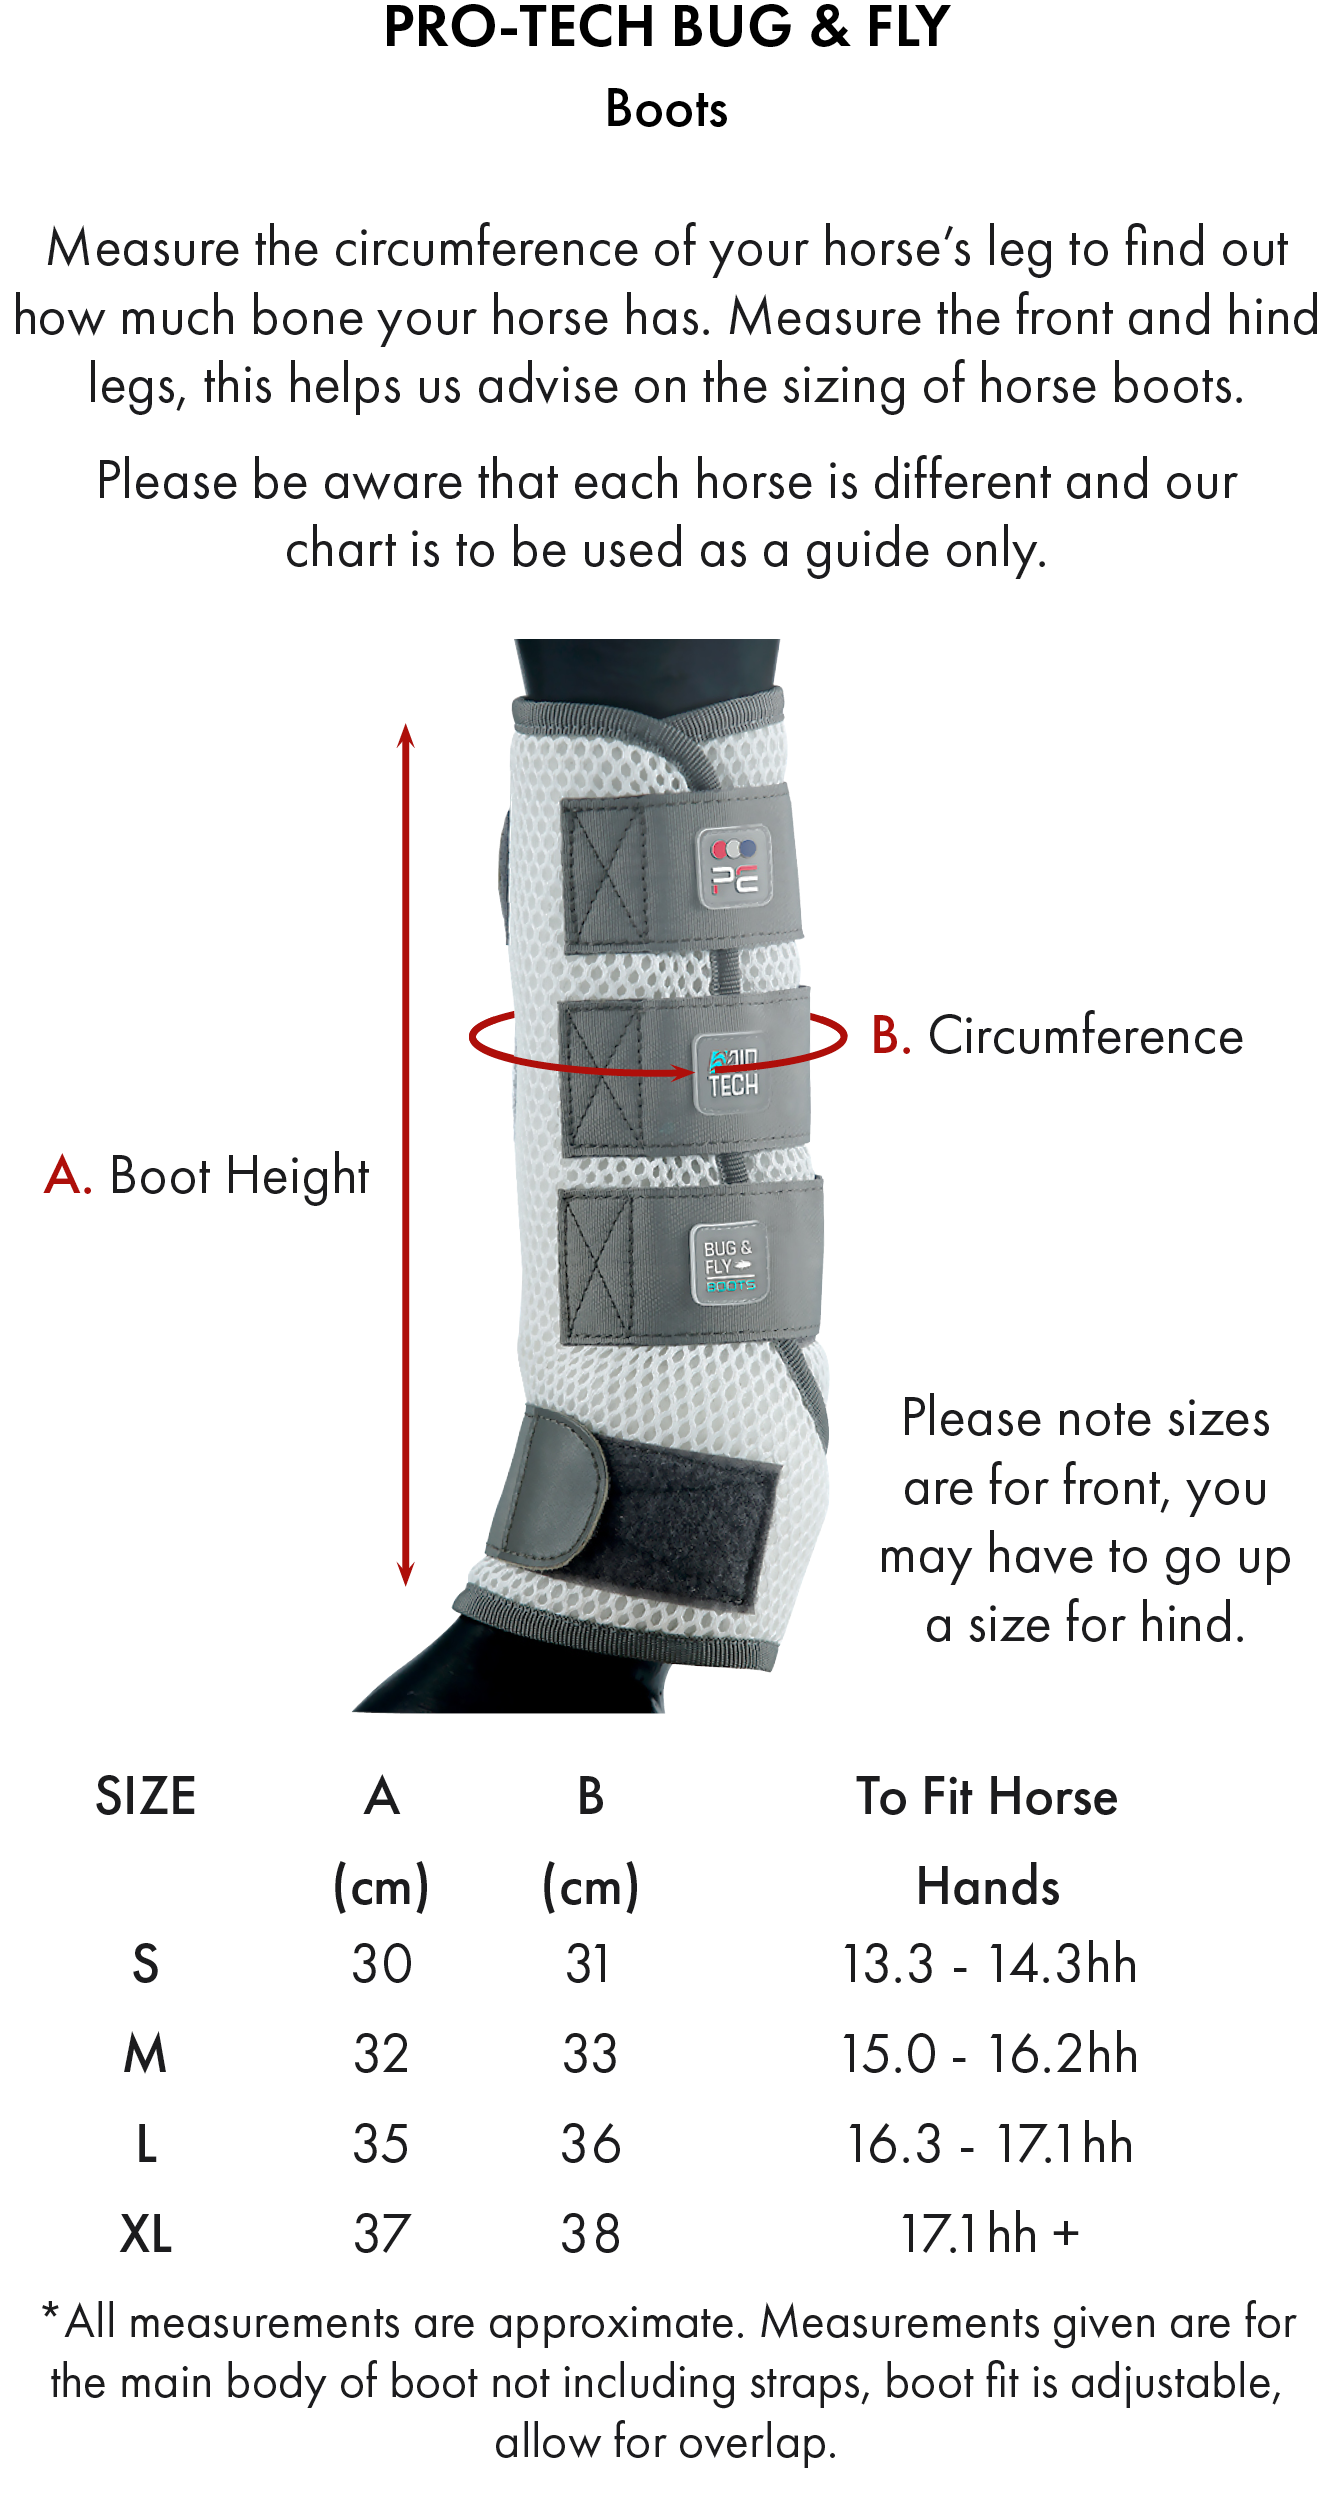 Premier Equine Pro Tech Bug and Fly Boots For Horses